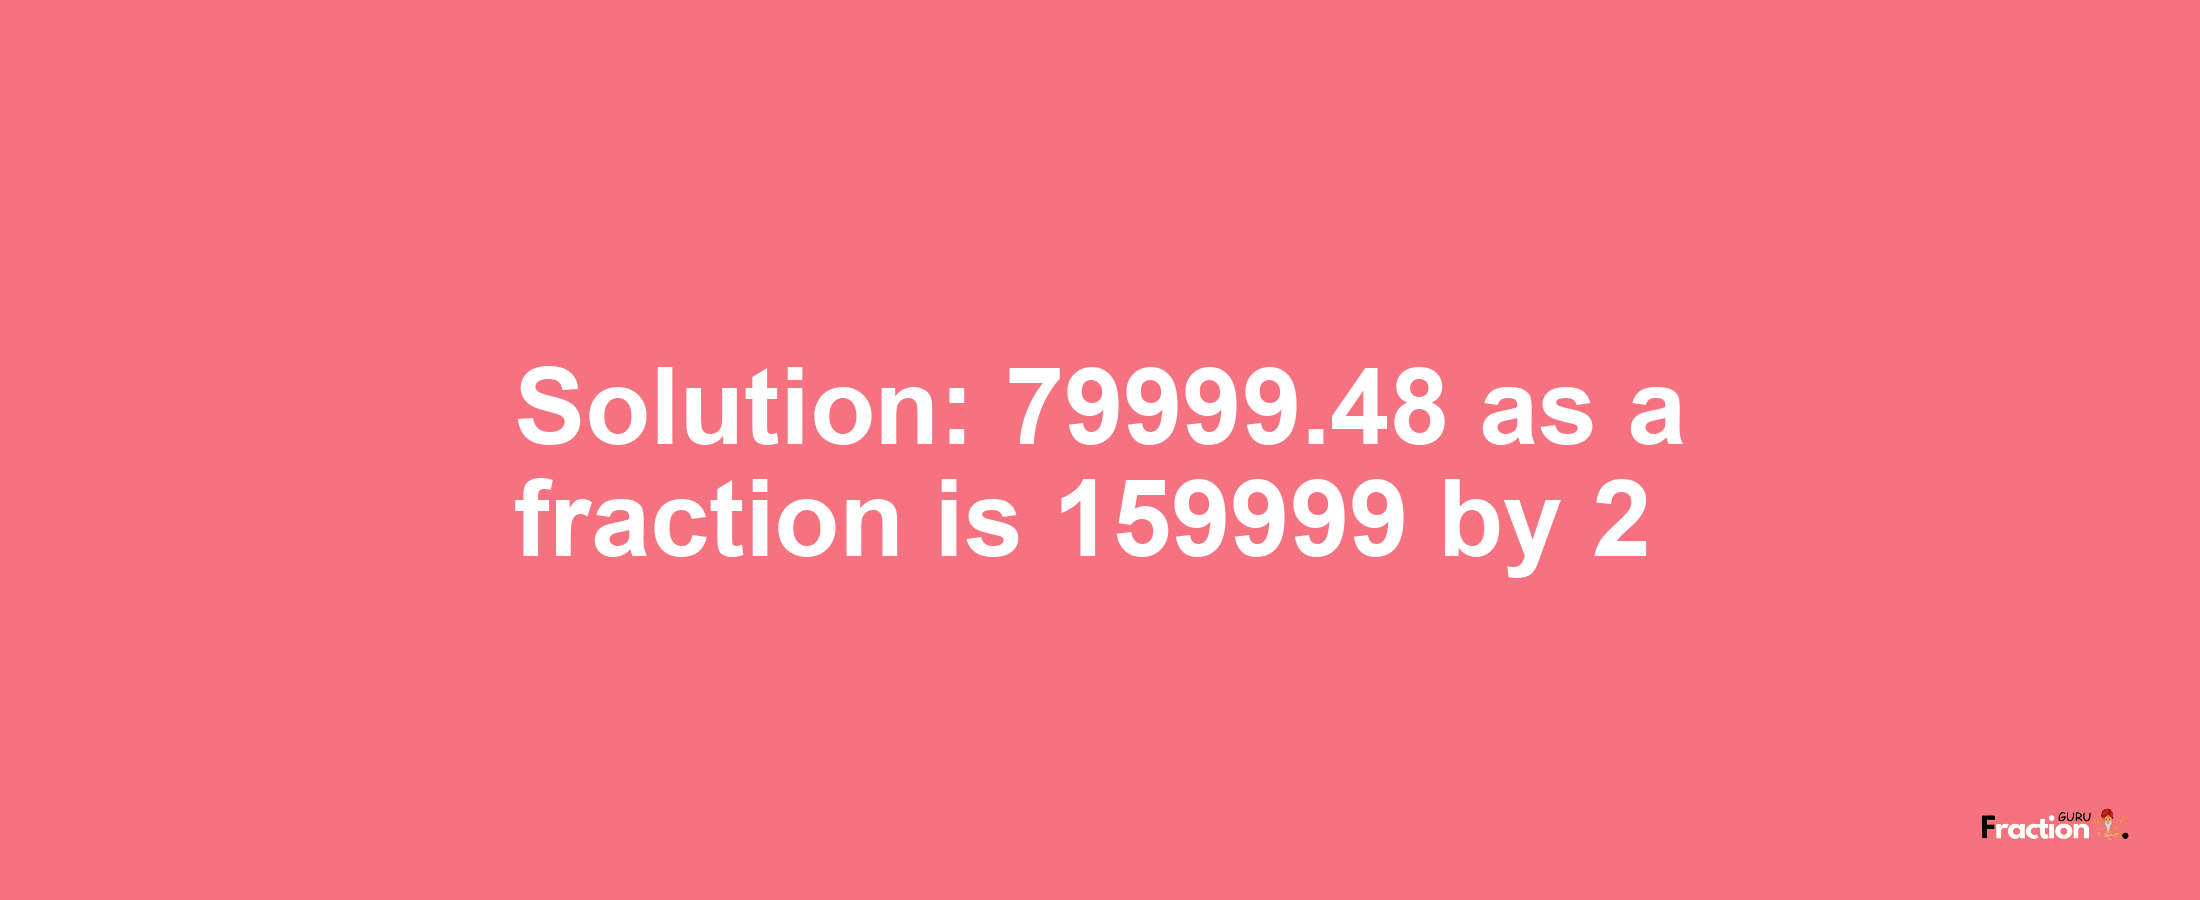 Solution:79999.48 as a fraction is 159999/2